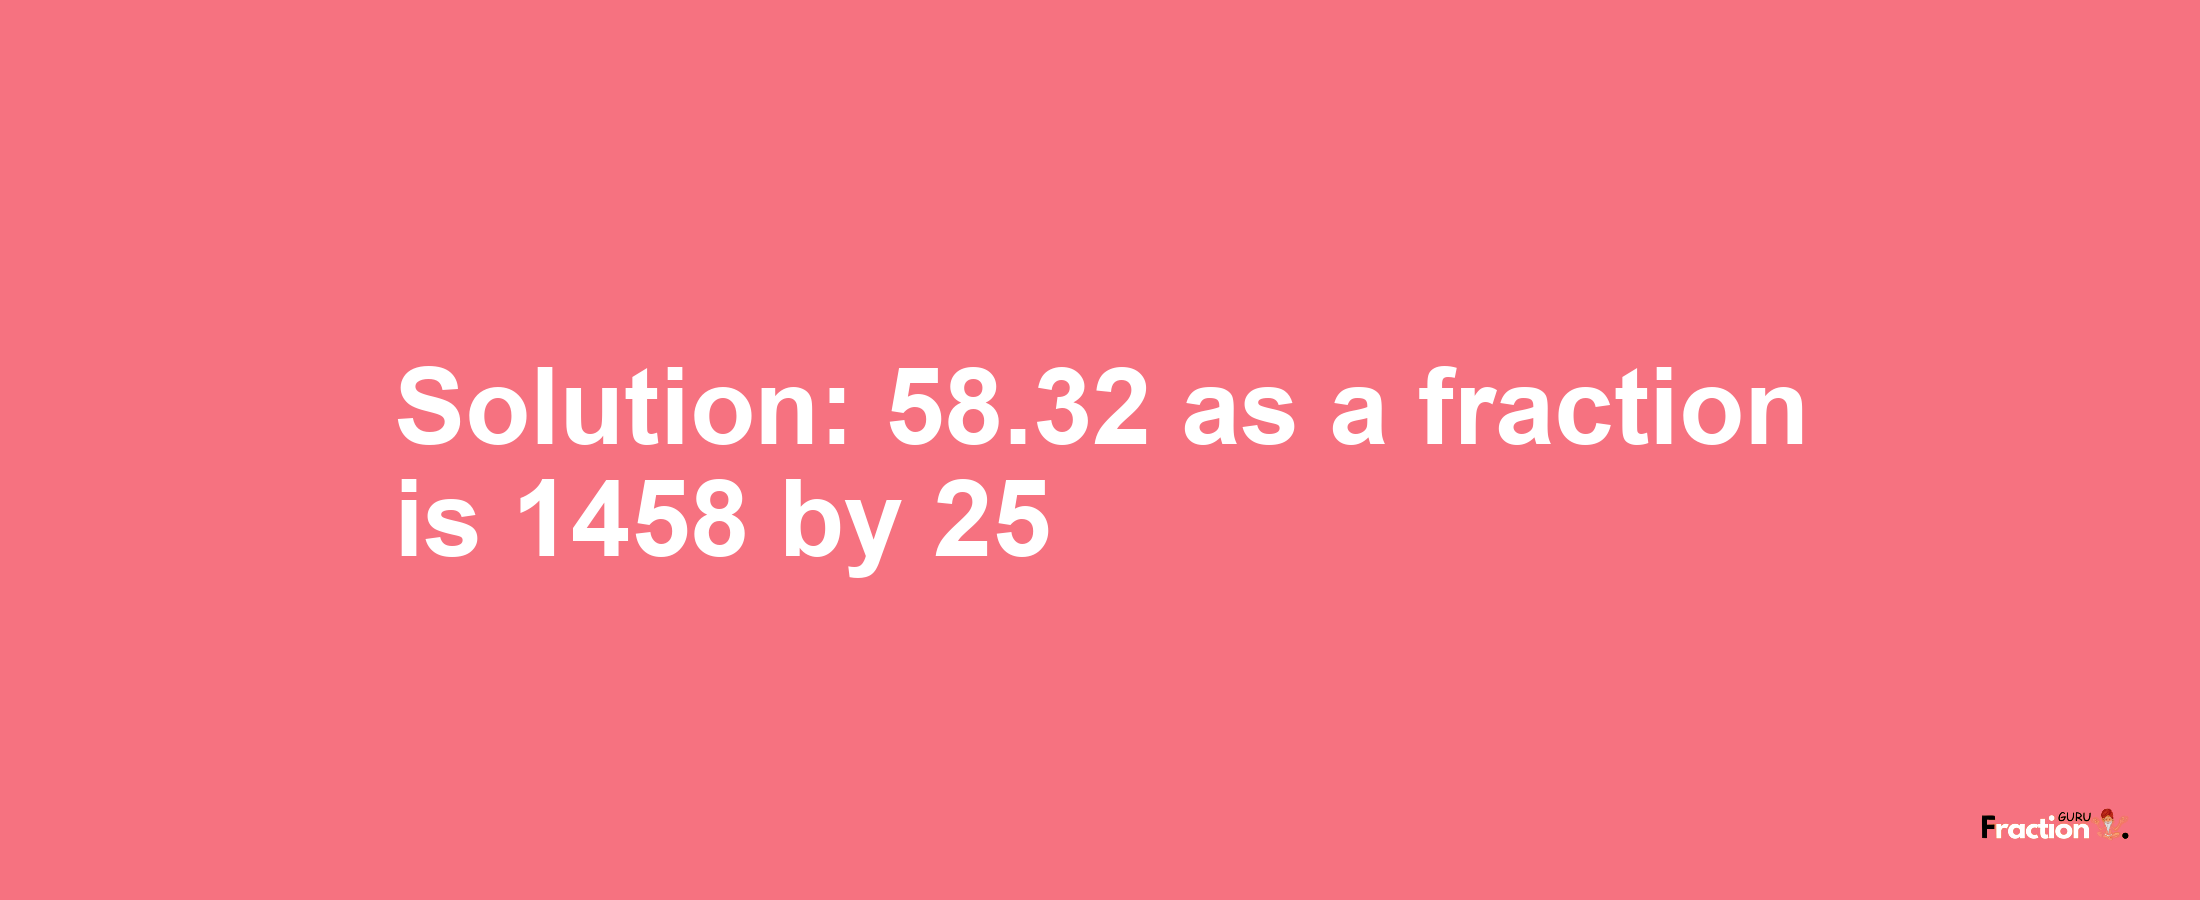 Solution:58.32 as a fraction is 1458/25